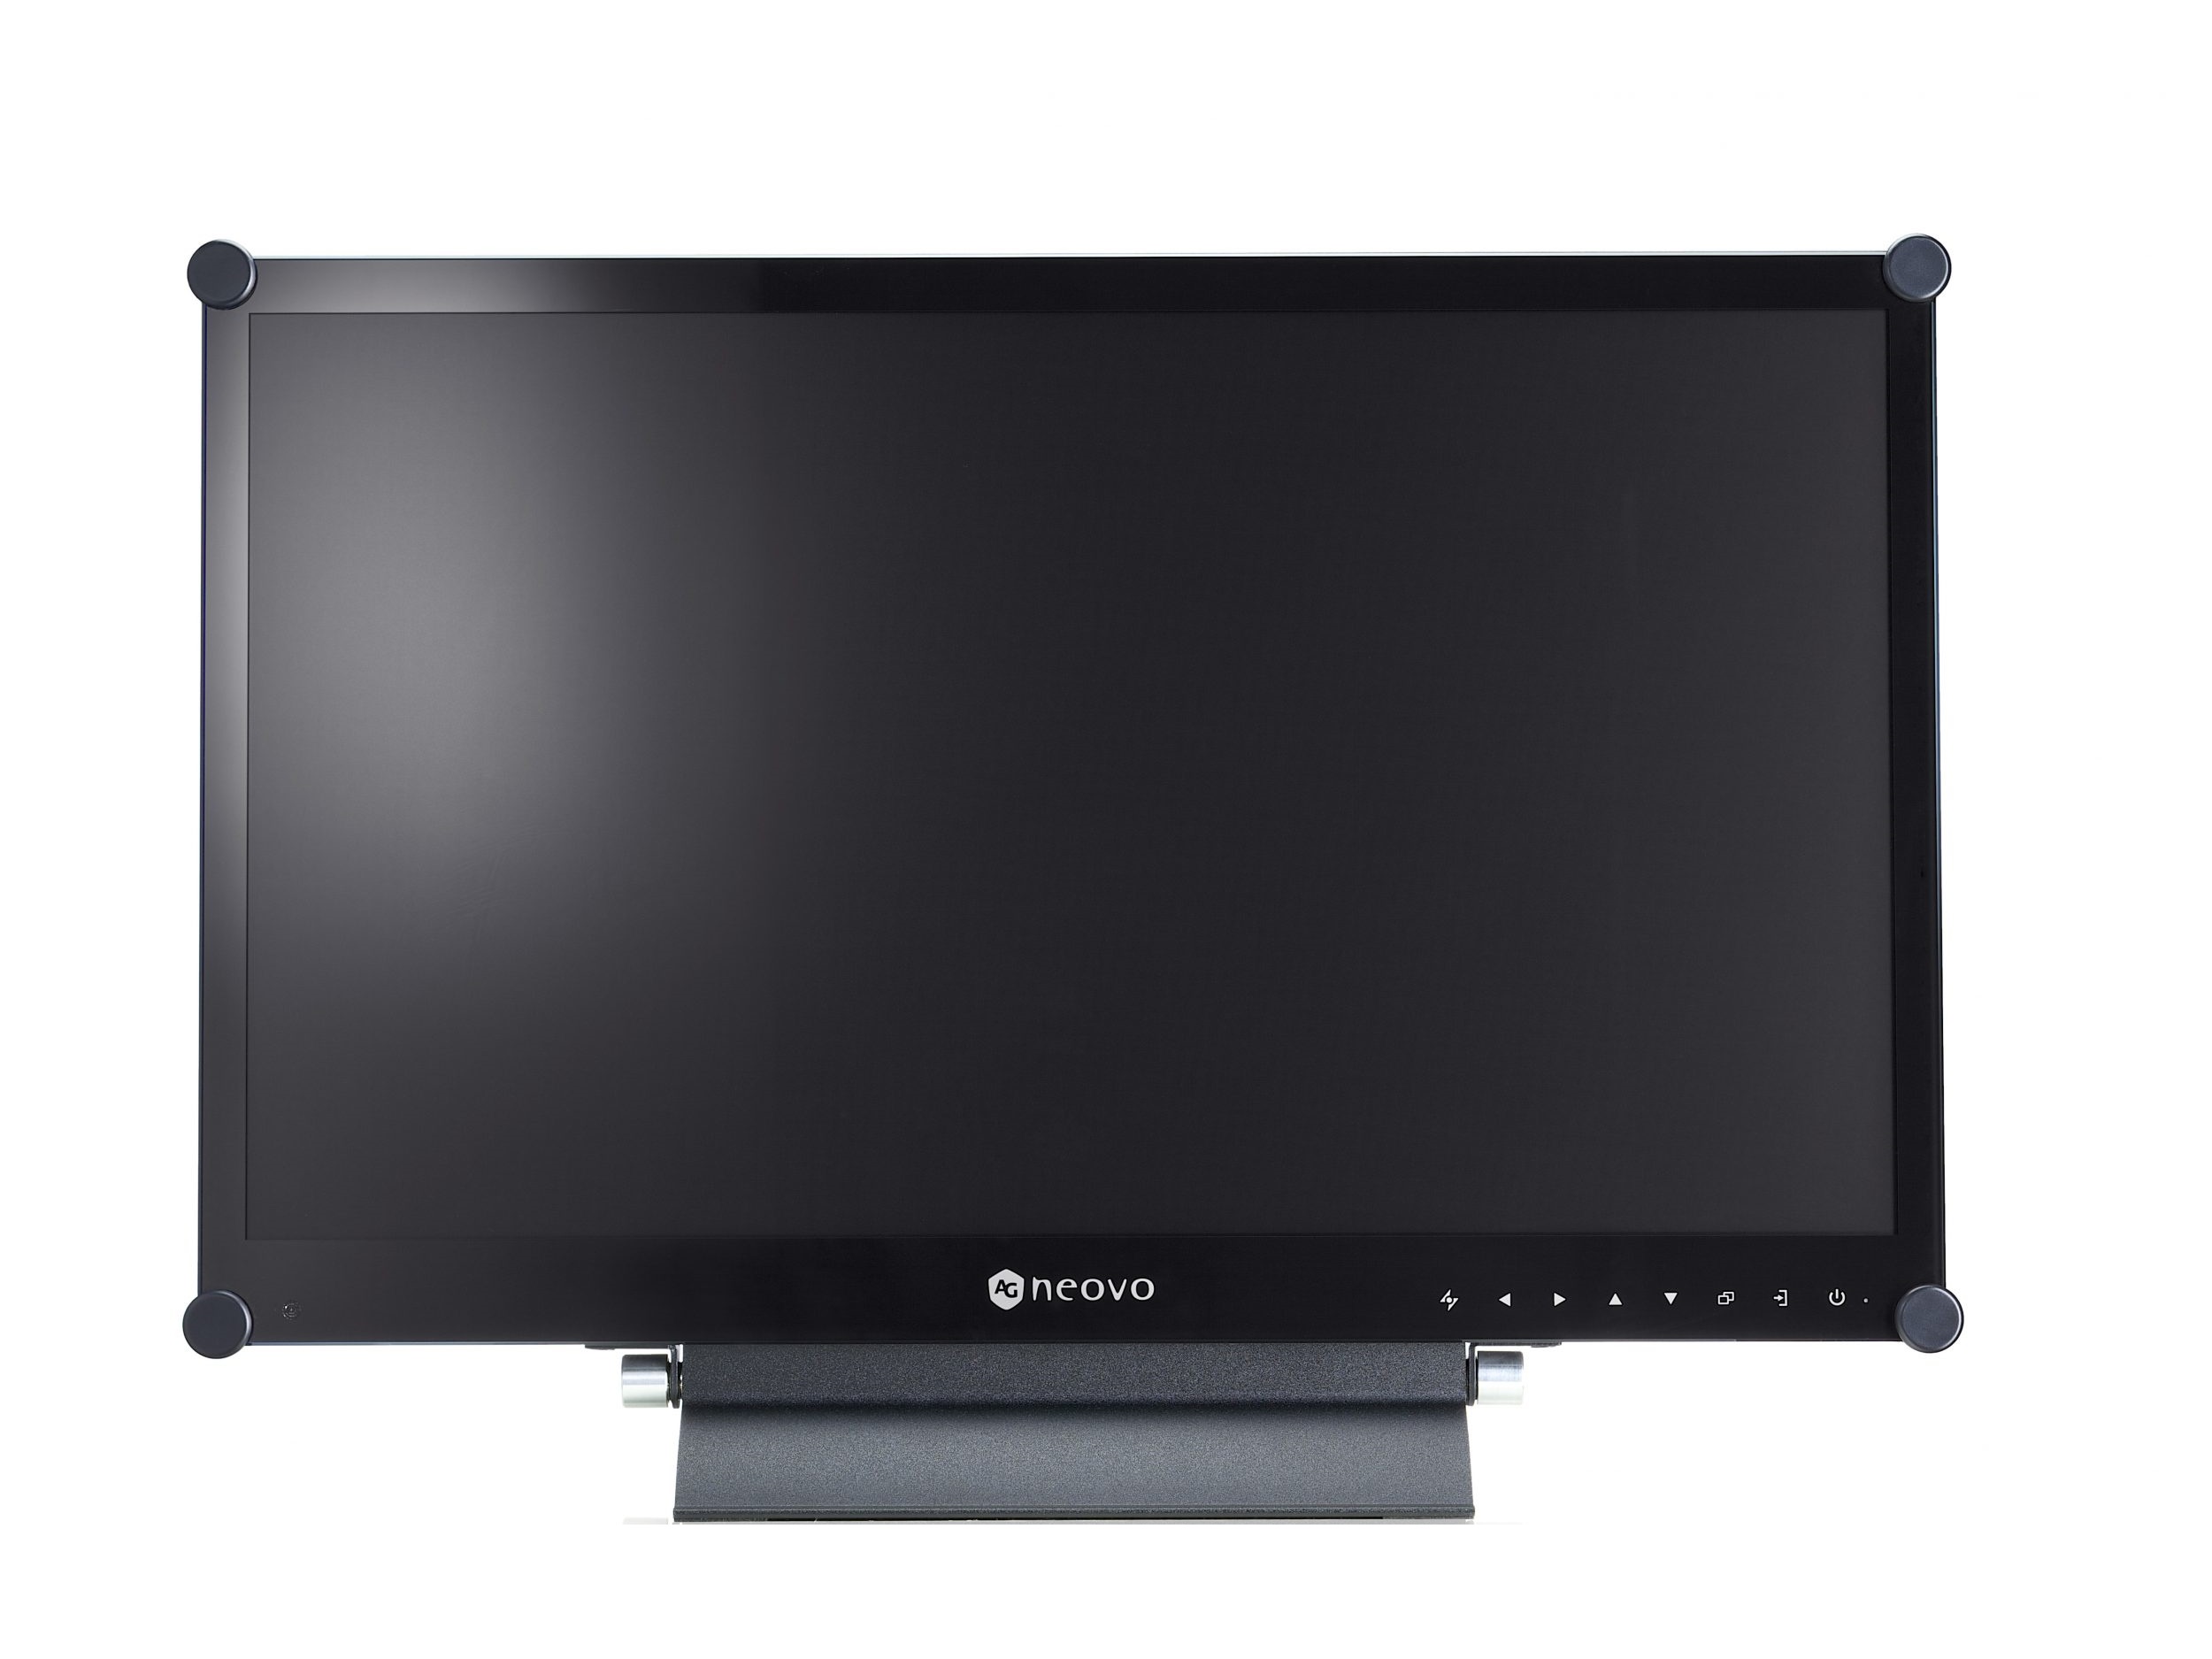 AG Neovo RX-22G 22-Inch 1080p Security Monitor With Metal Casing